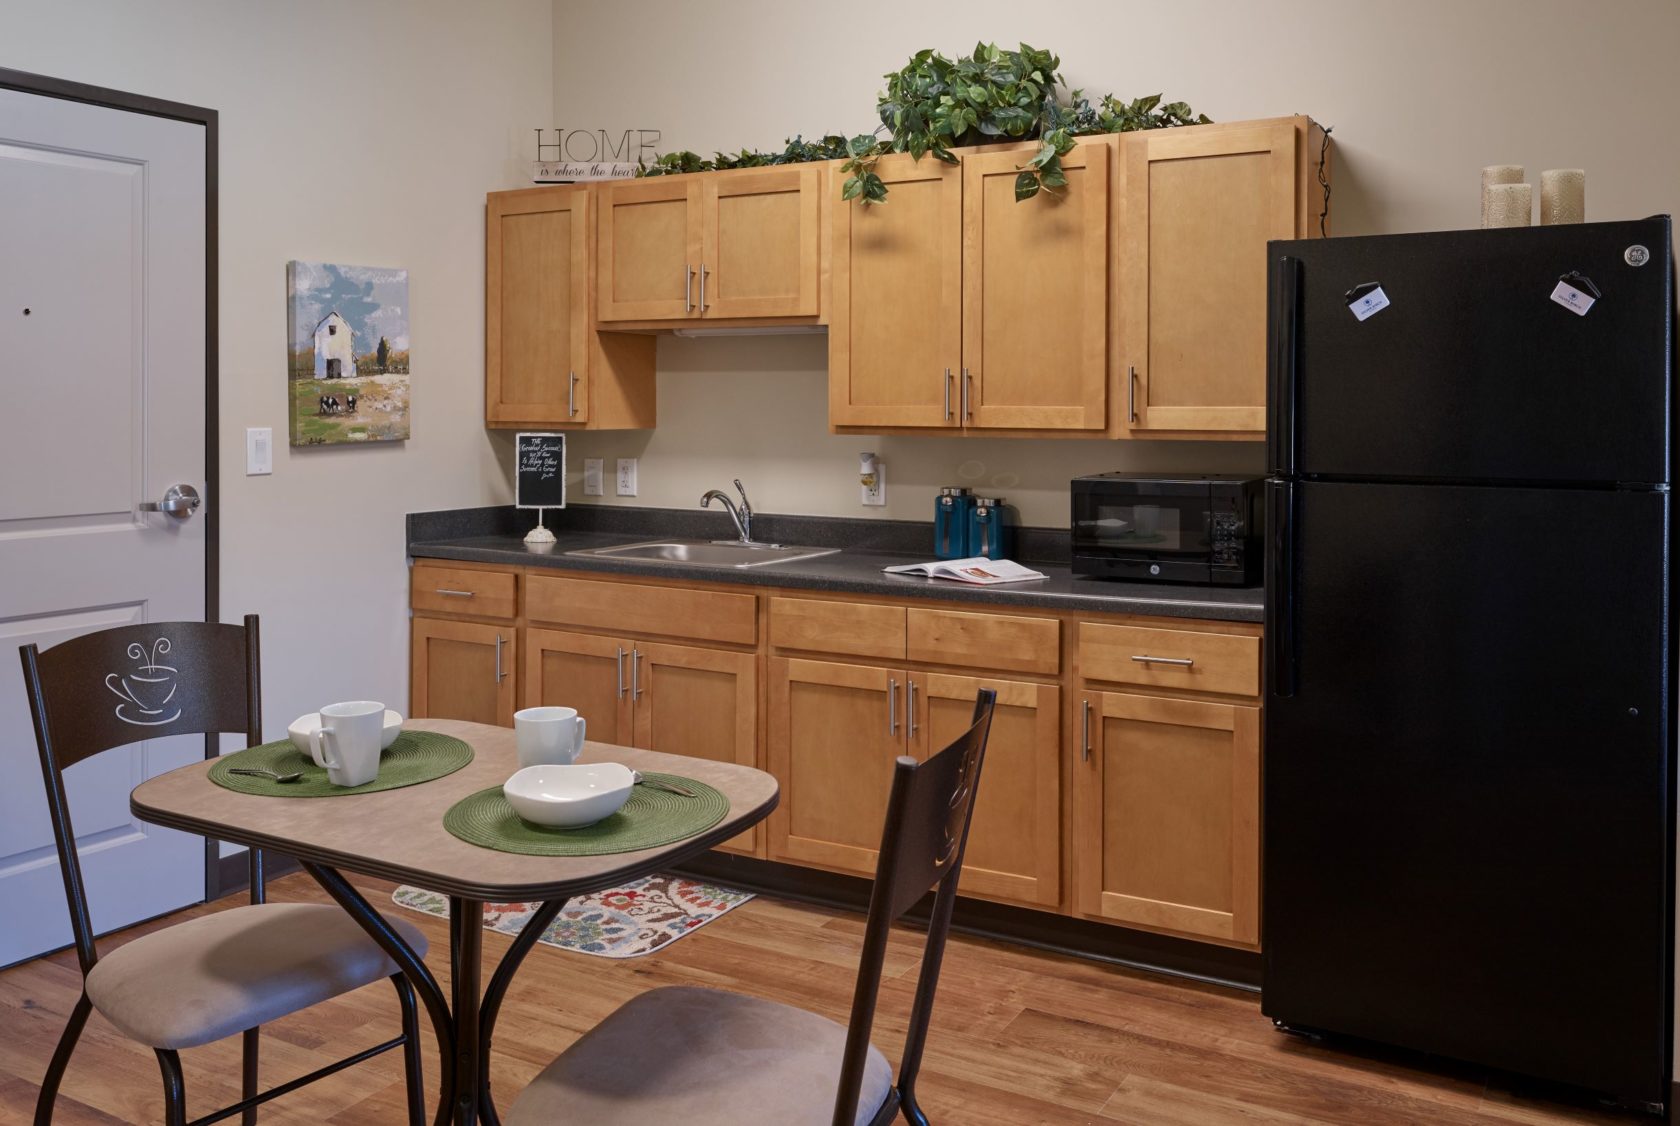 Assisted living 1 bedroom apartment kitchen